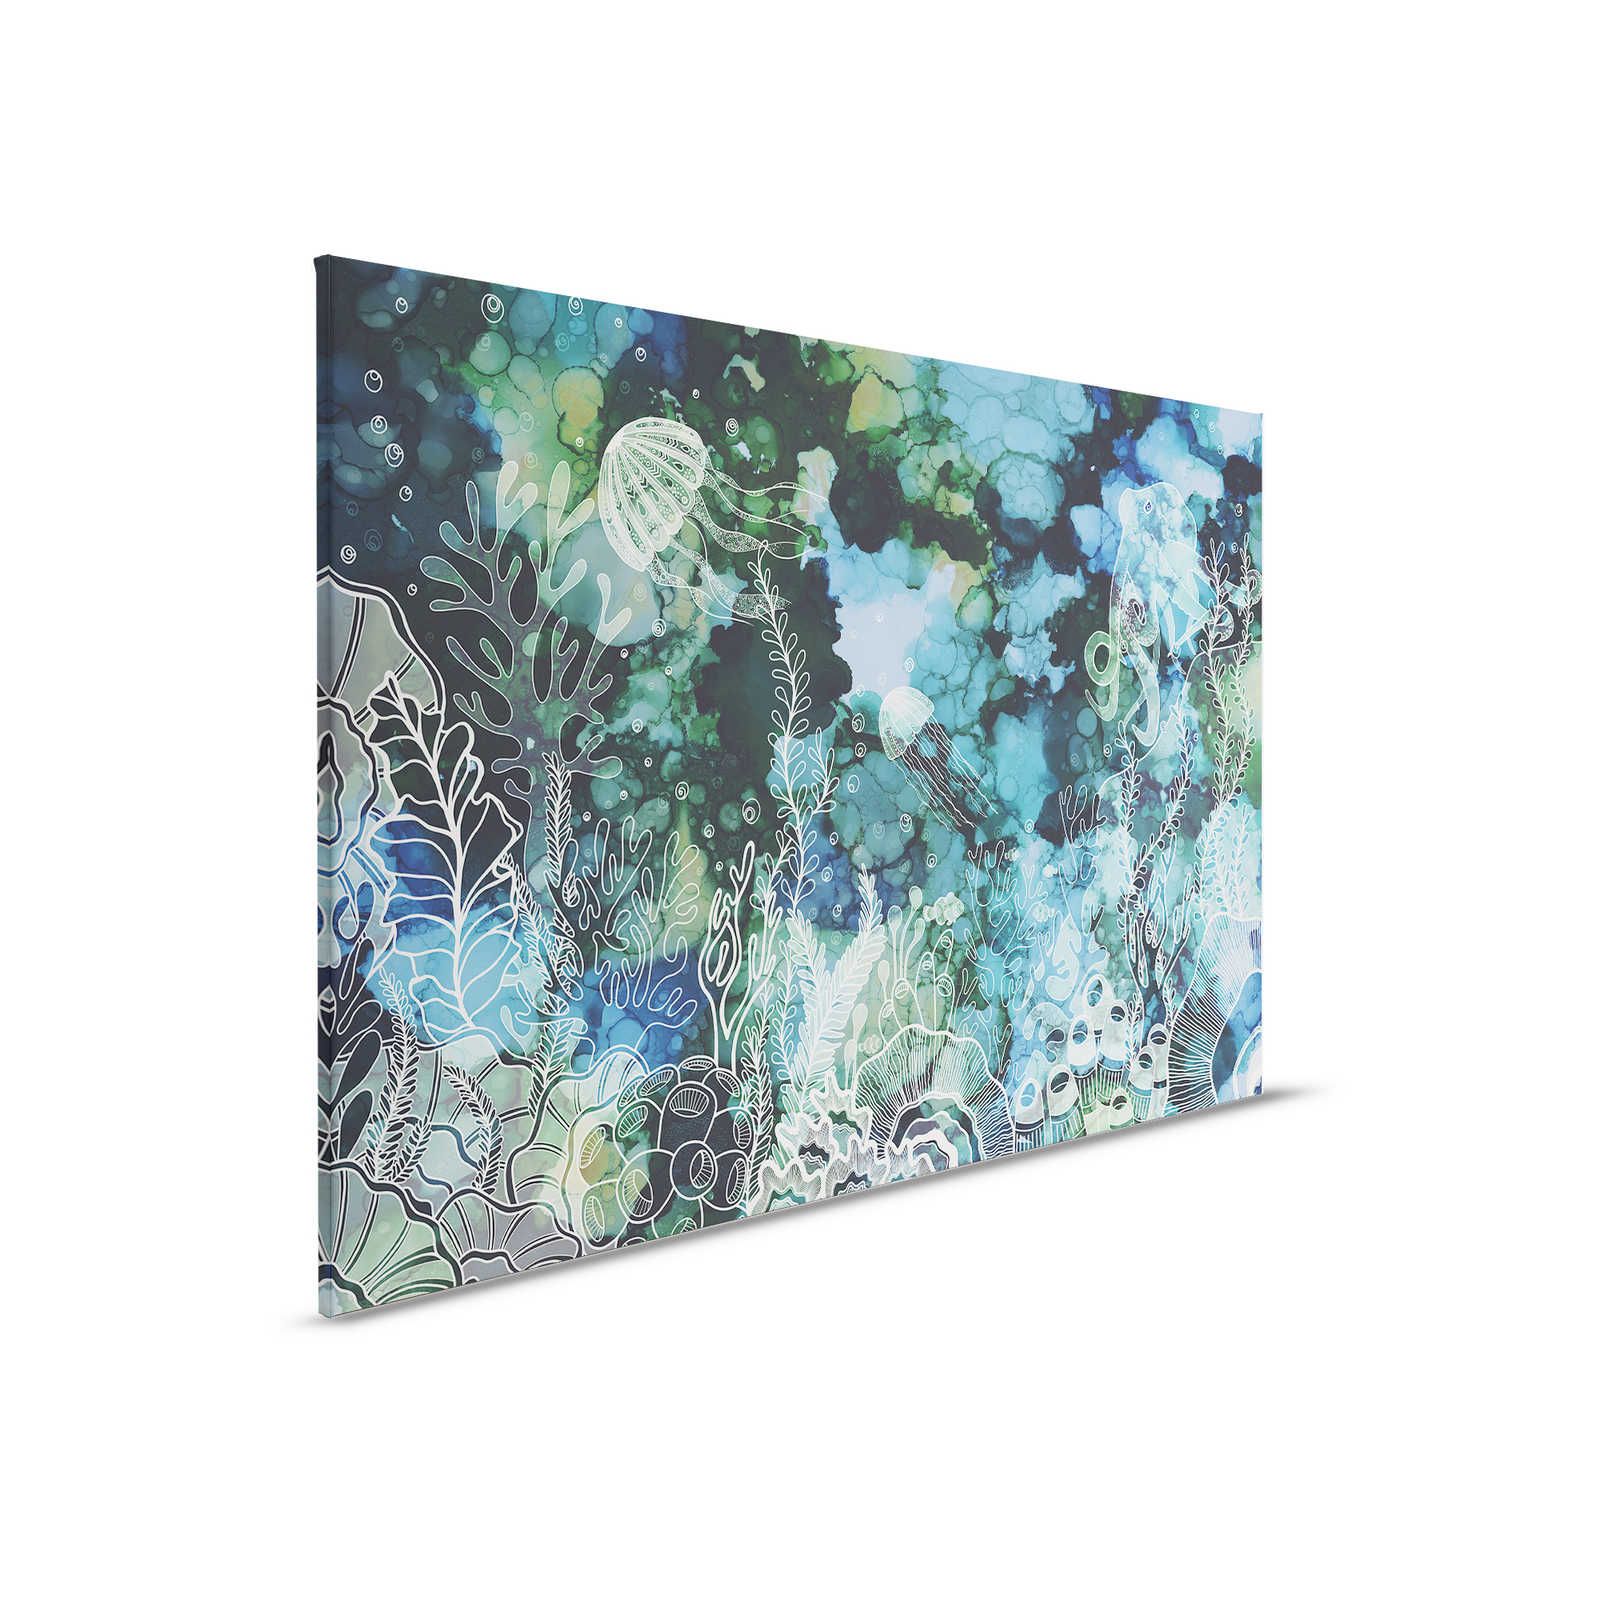         Canvas painting with underwater coral reef in acrylic colours - 0,90 m x 0,60 m
    